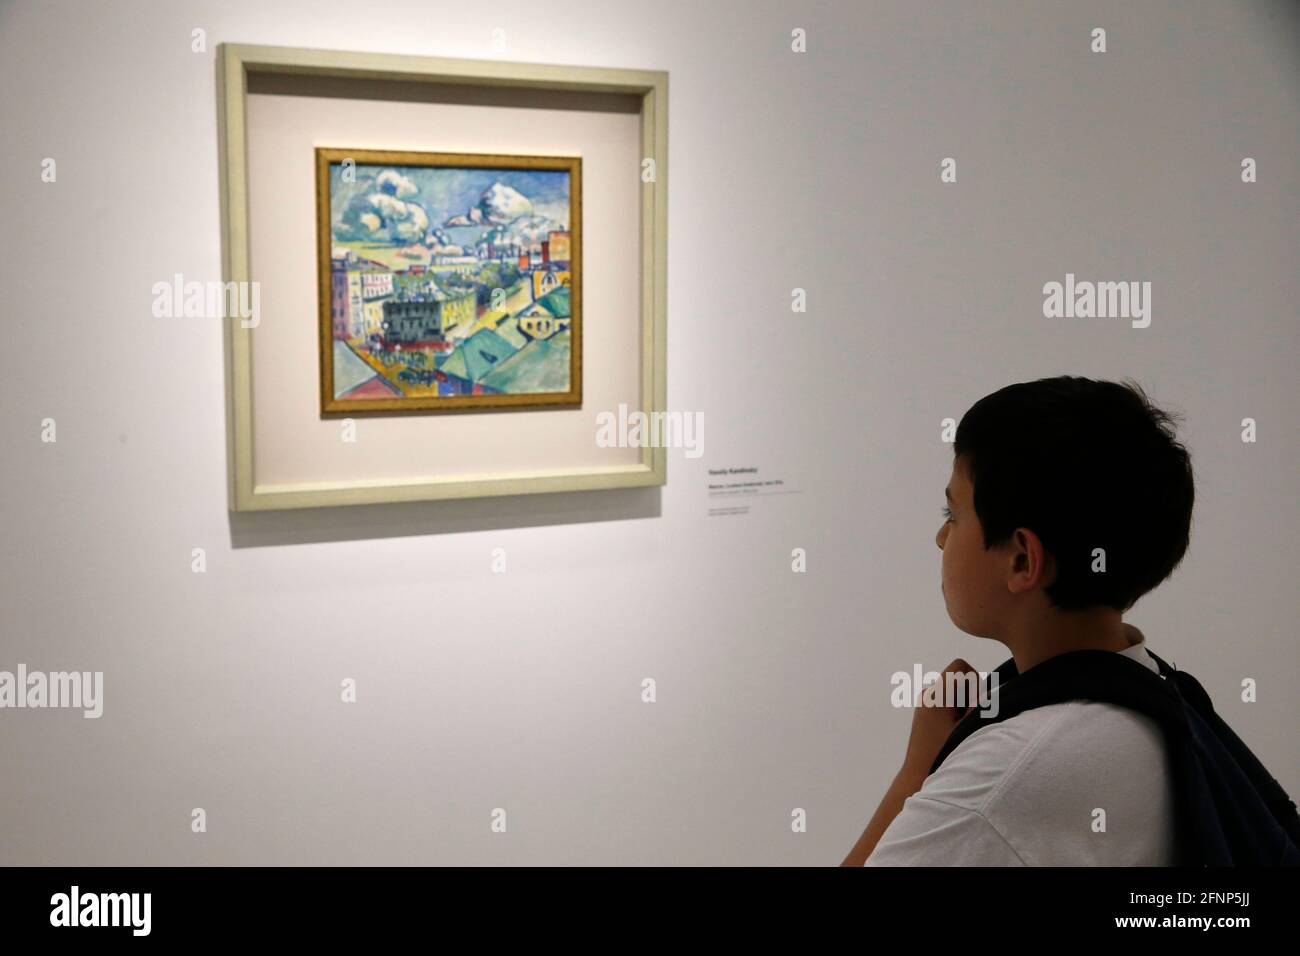 Pompidou center, National Museum of Modern Art, Paris, France.  Boy looking at a painting Stock Photo